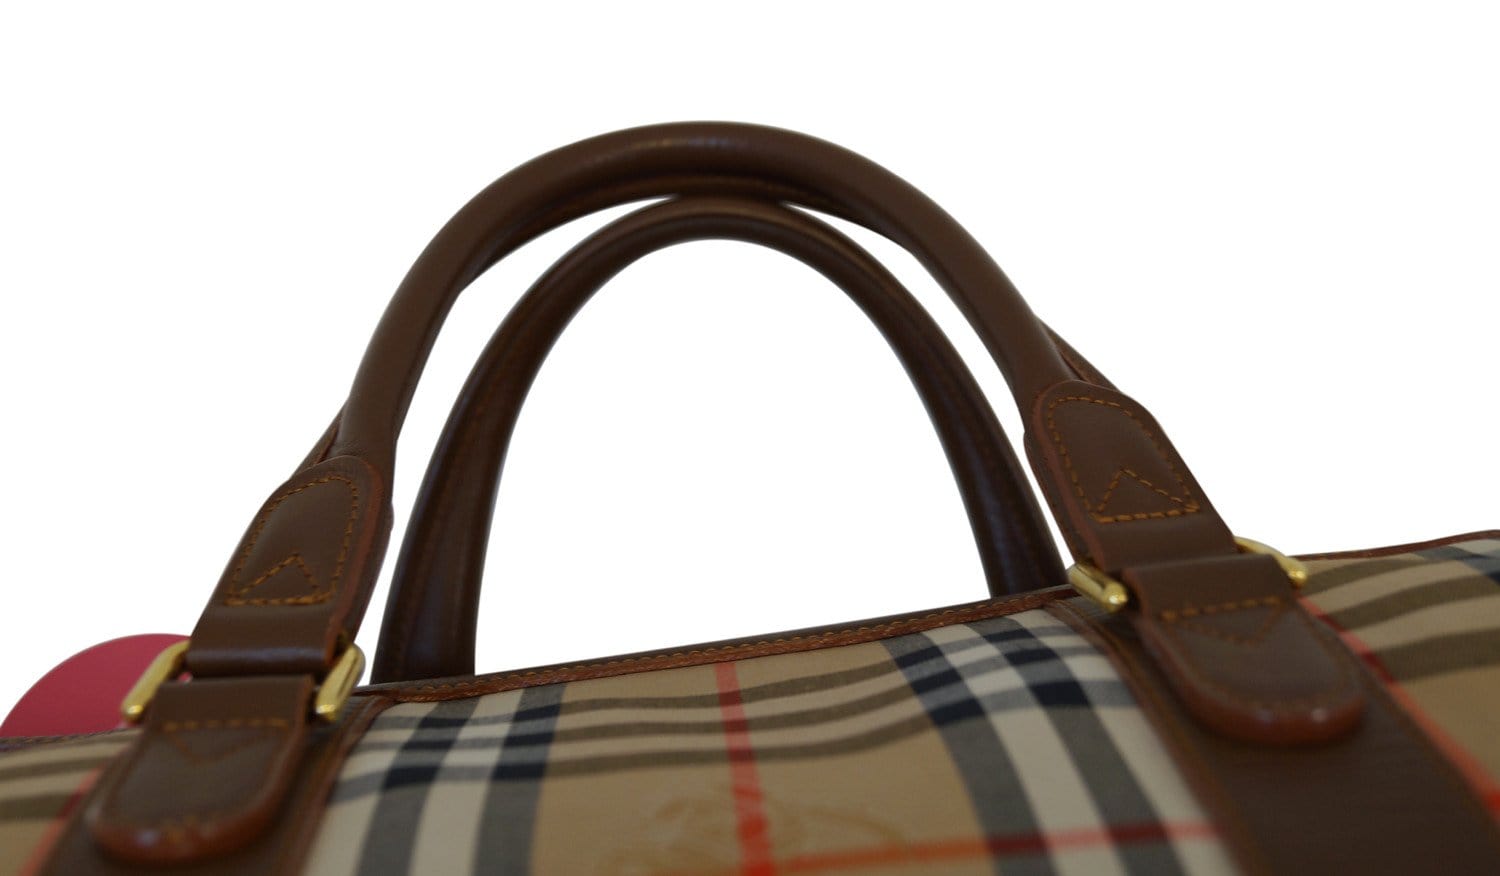 Sold at Auction: BURBERRY Nova Check Dome Leather Satchel, Bag